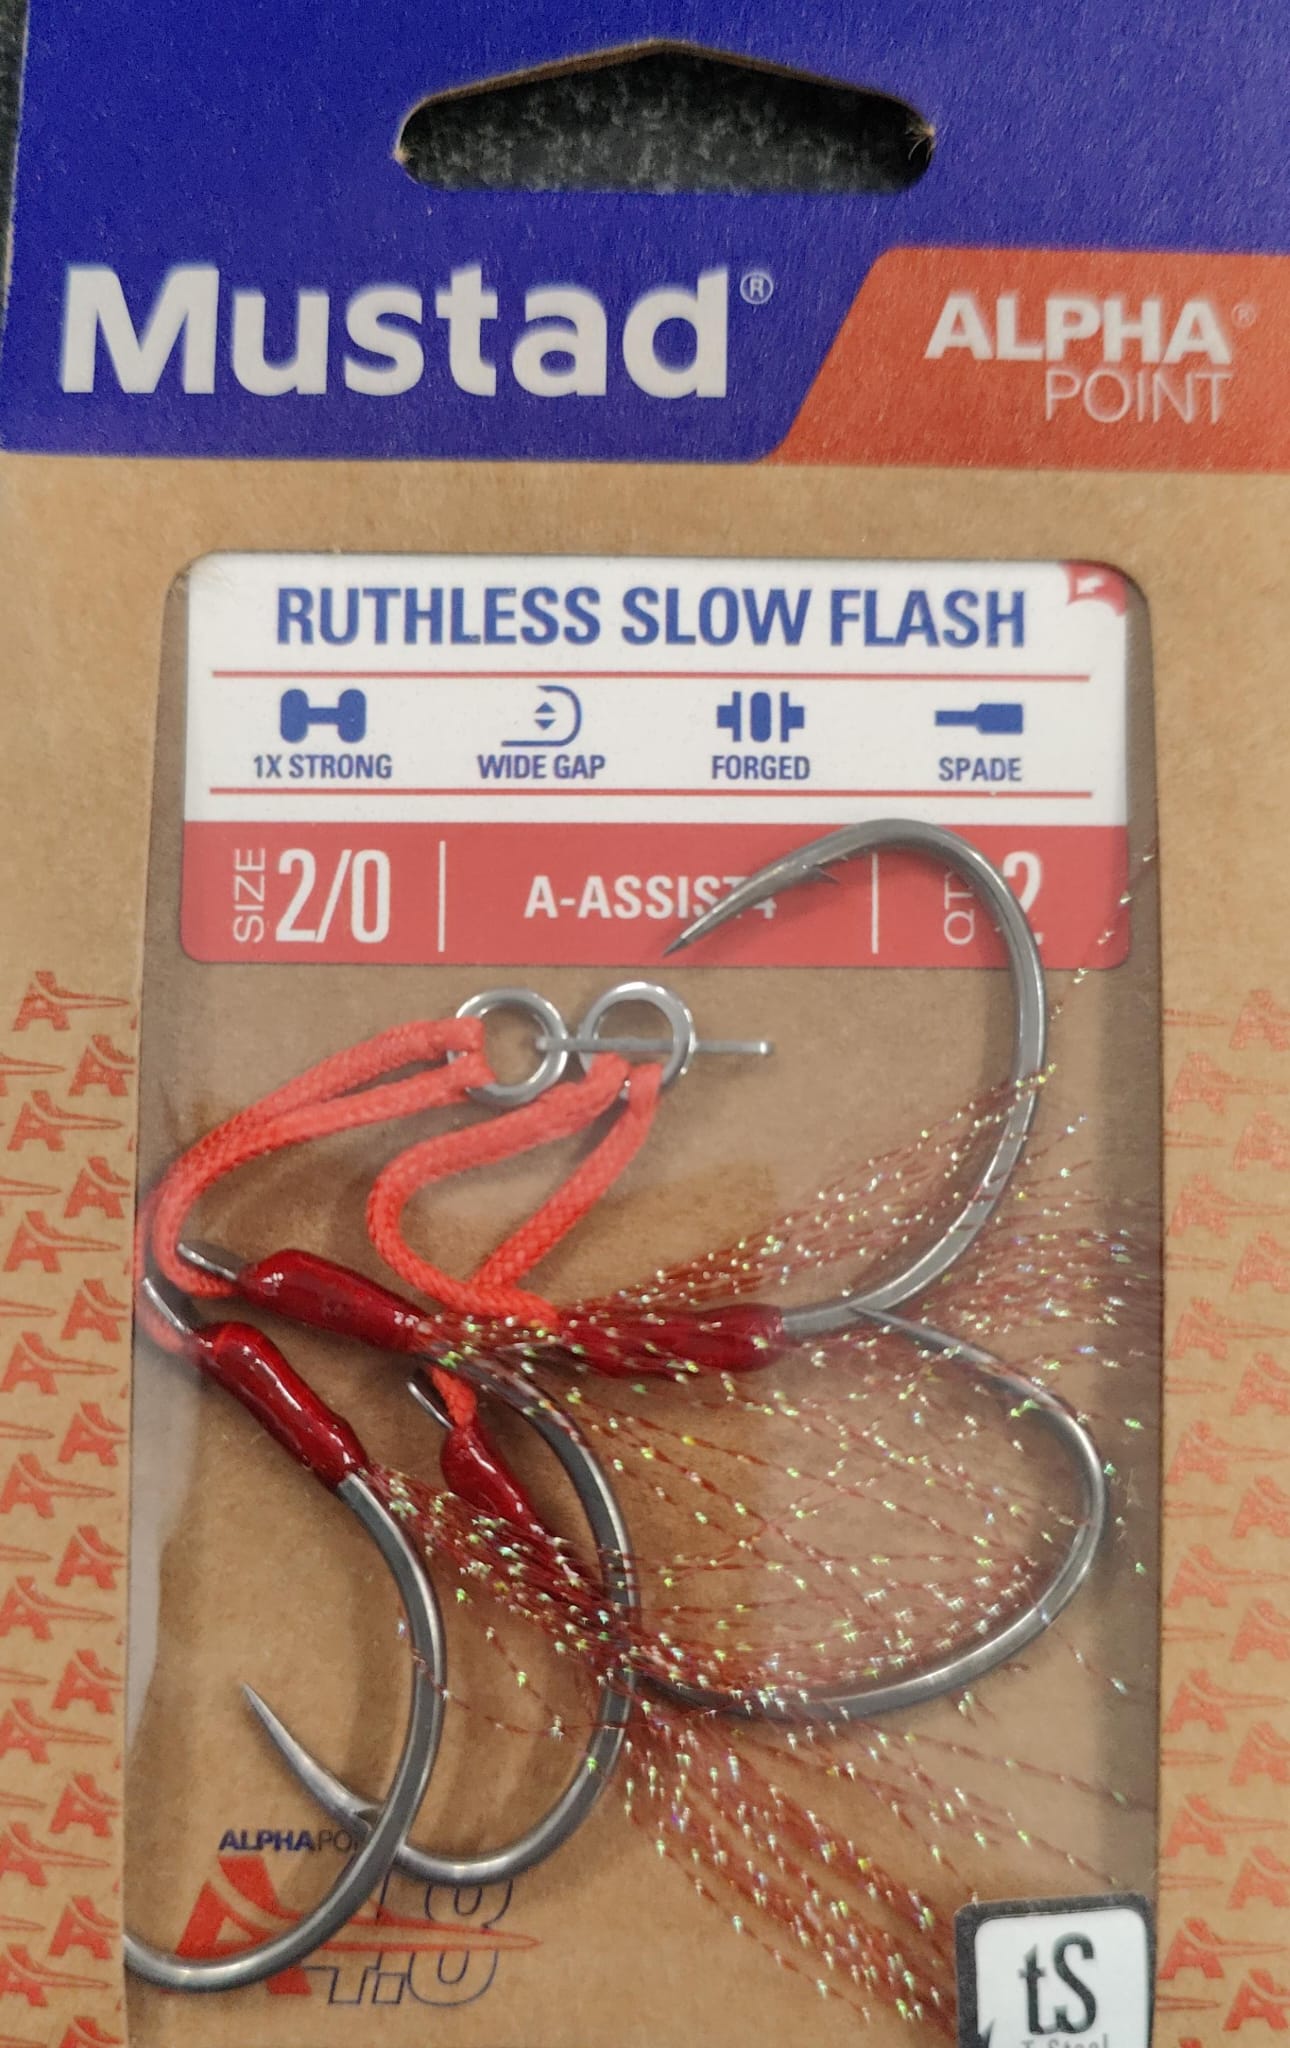 MUSTAD RUTHLESS SLOW FLASH 2/0 - Dimensione Pesca S.r.l.